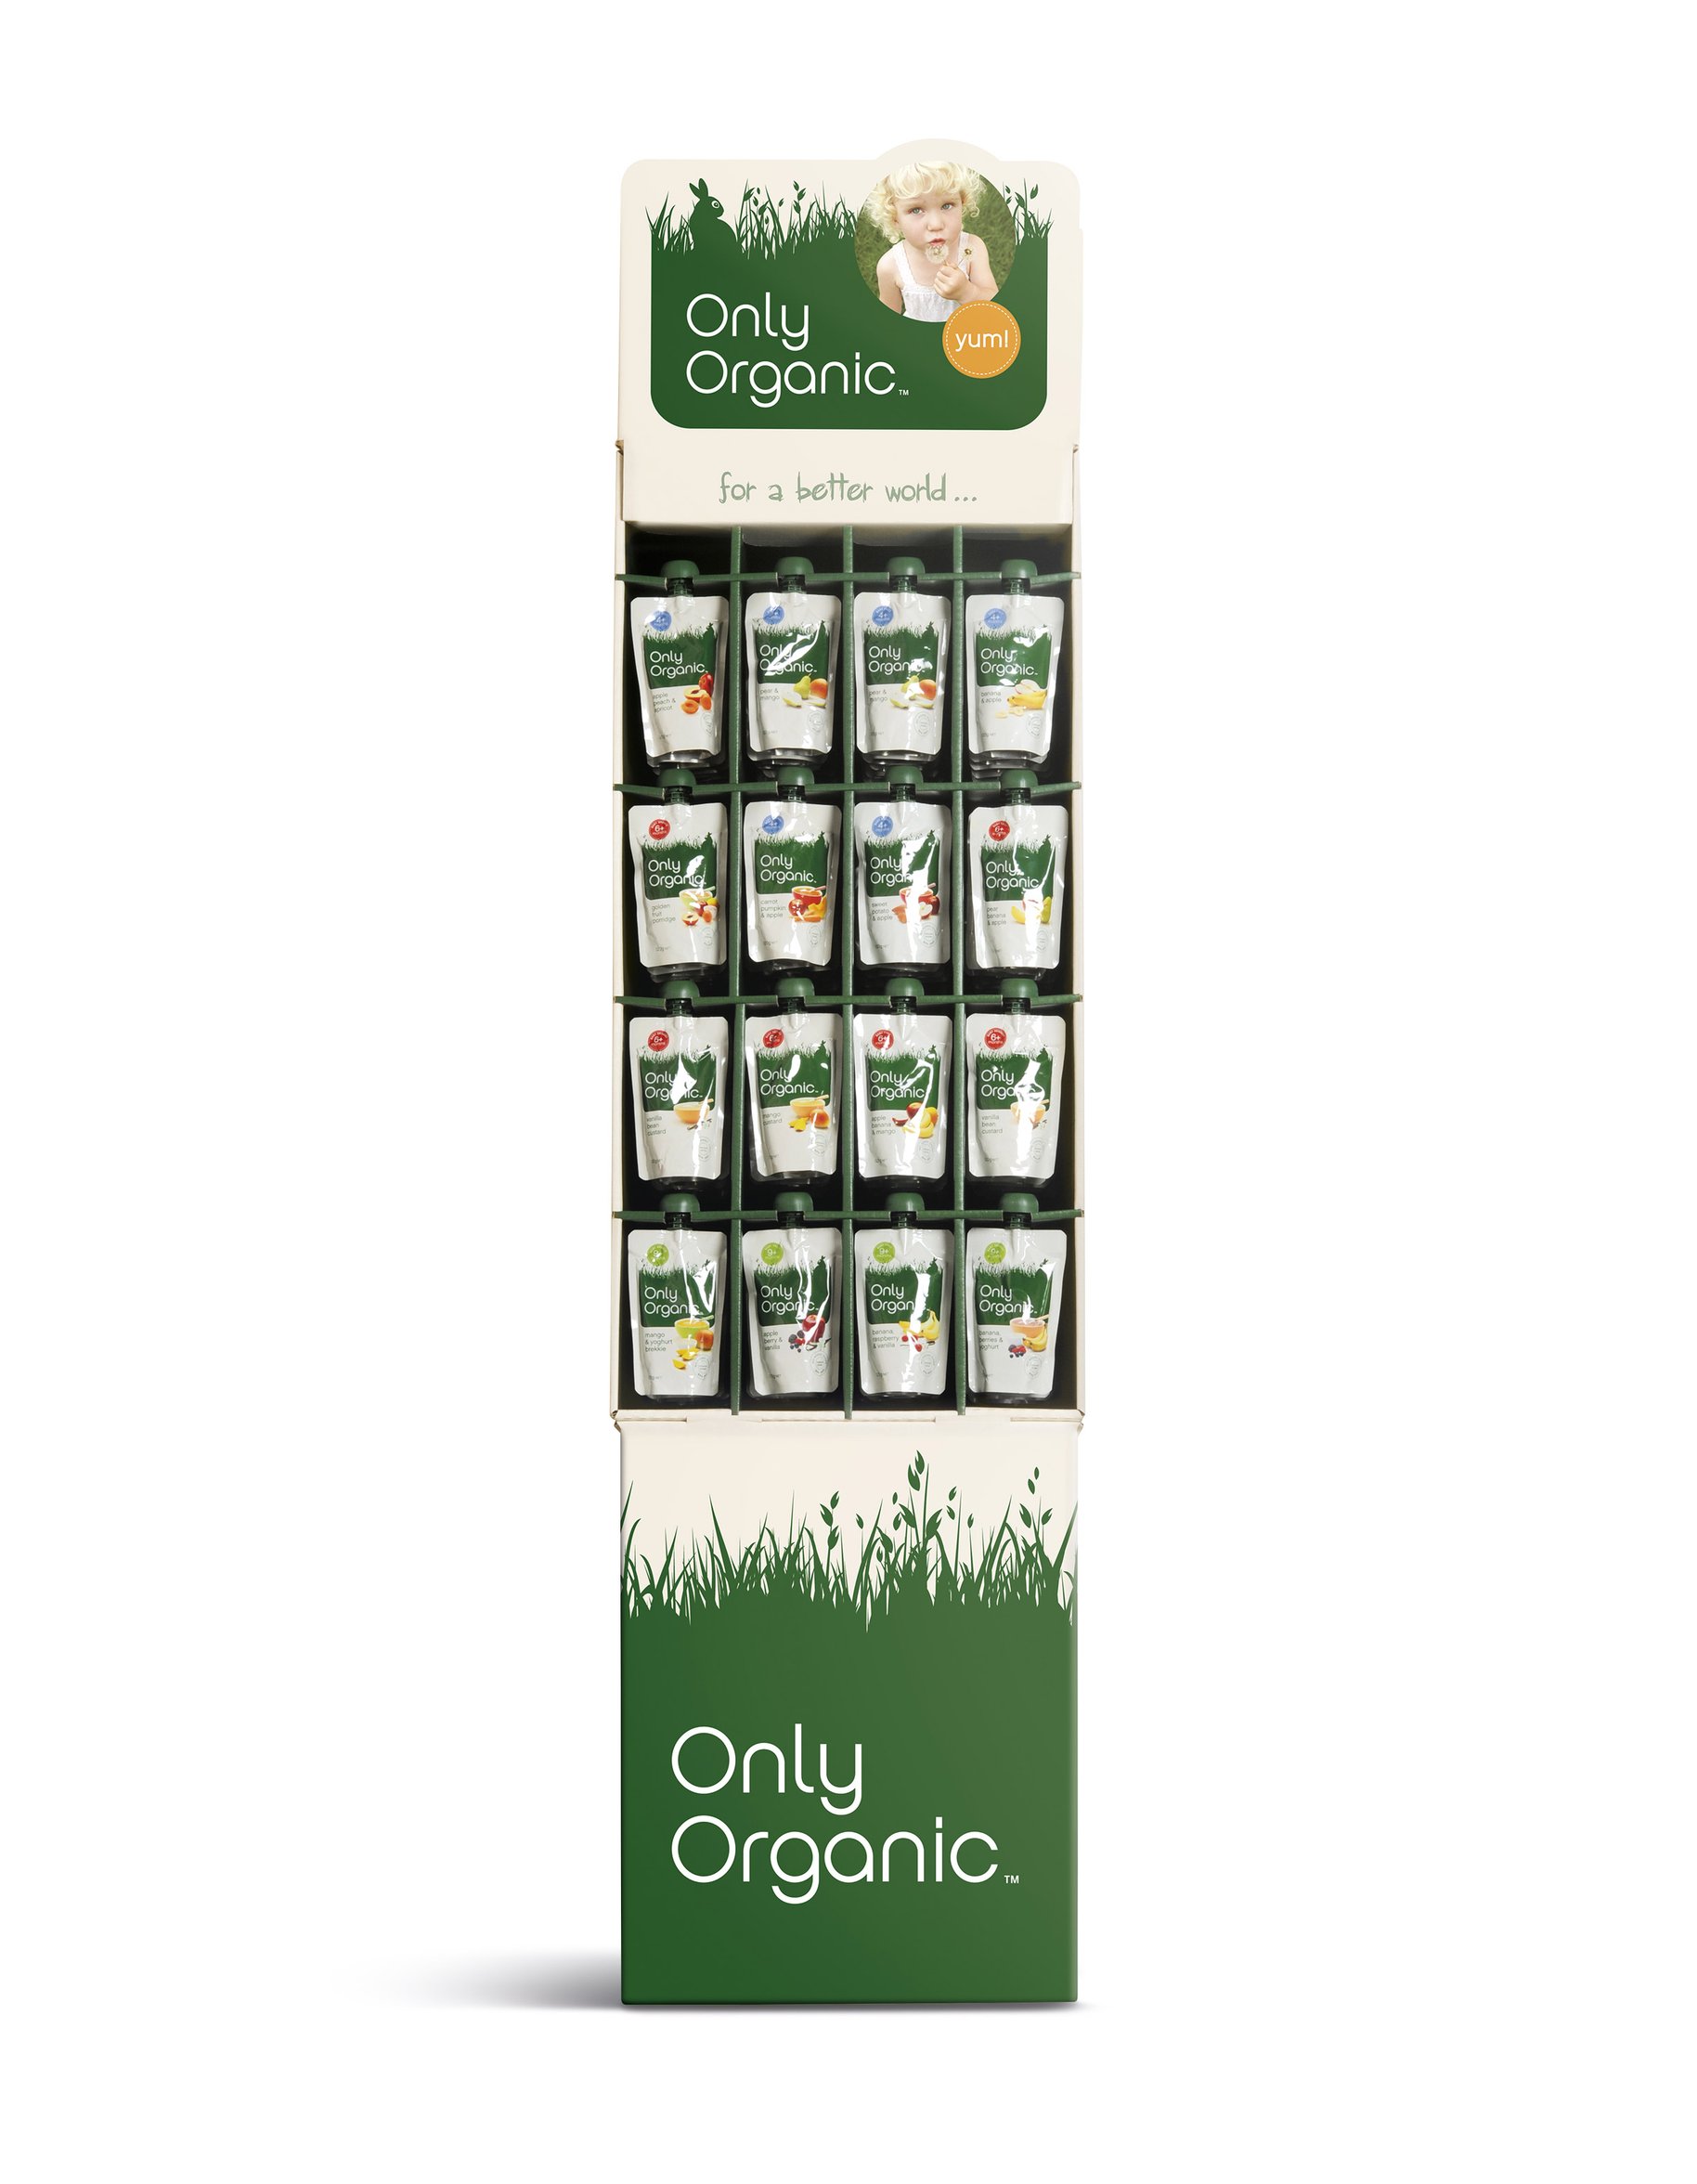 Only Organic pouch packaging display stand 